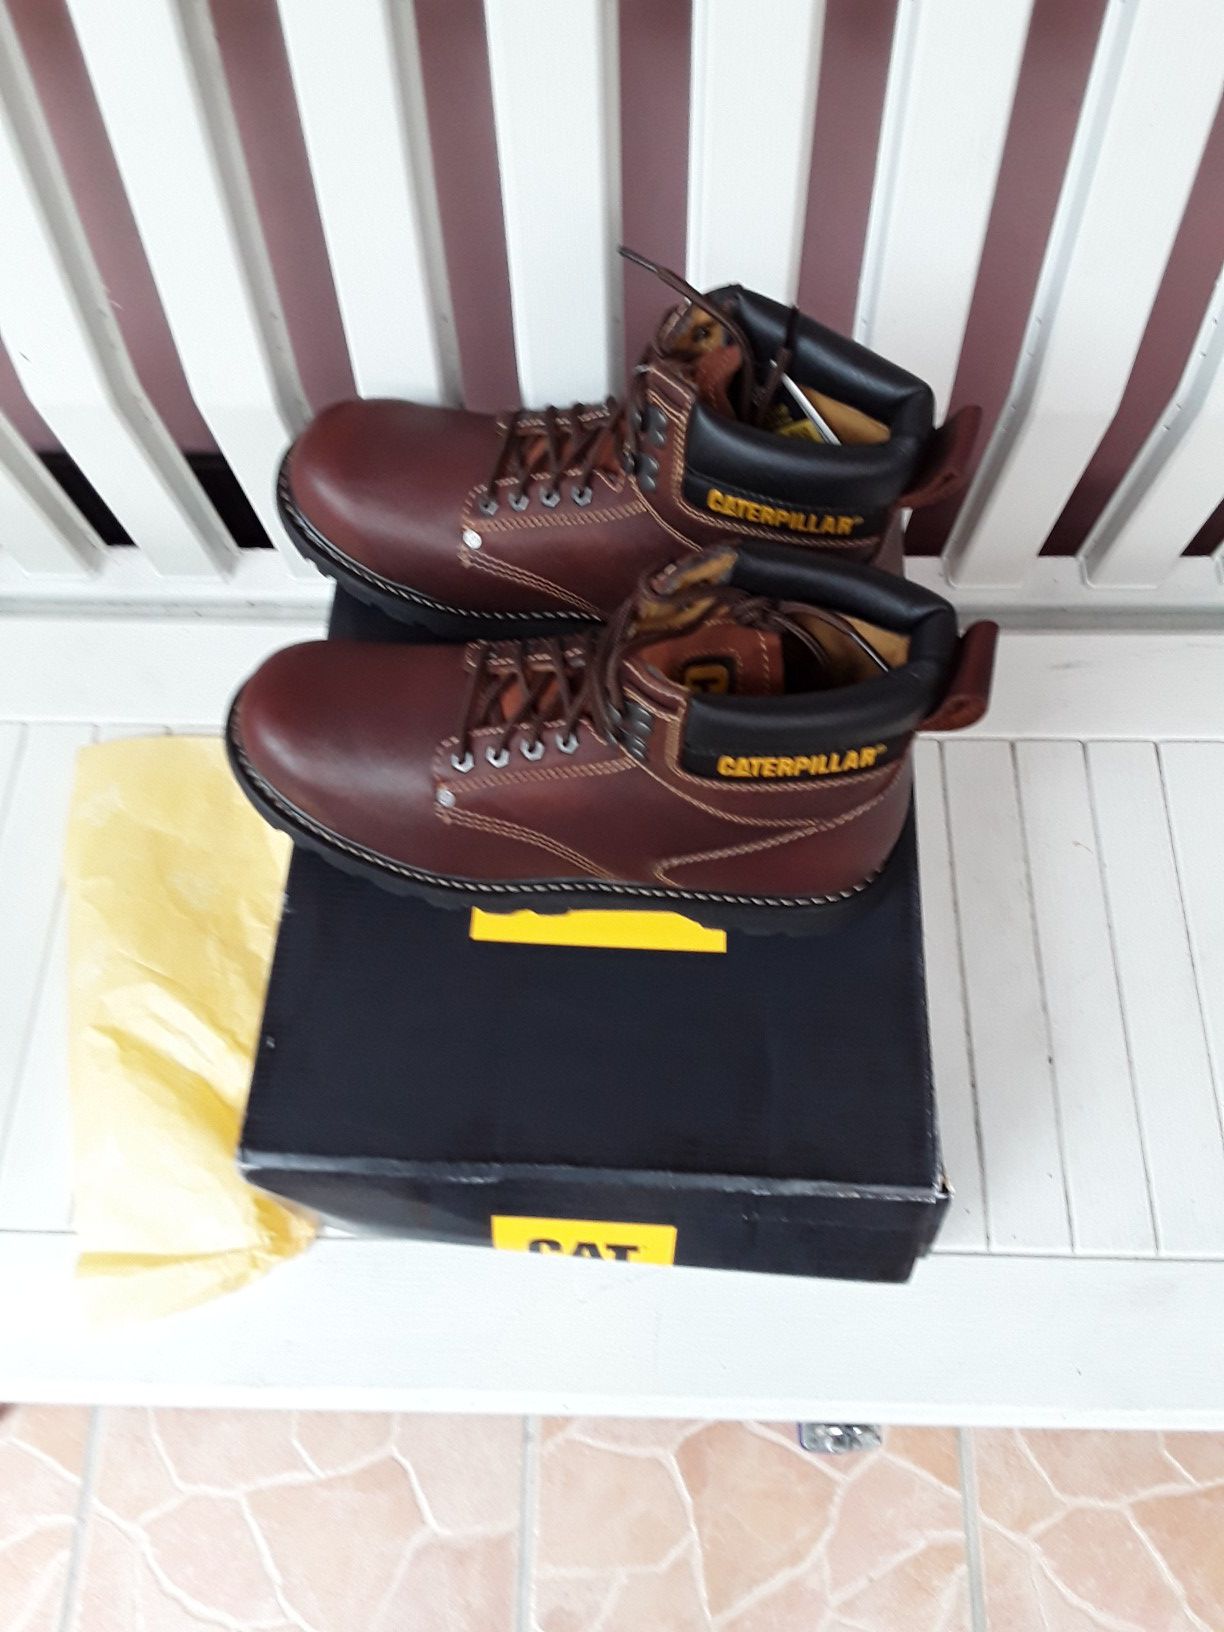 Work boots caterpilar all size